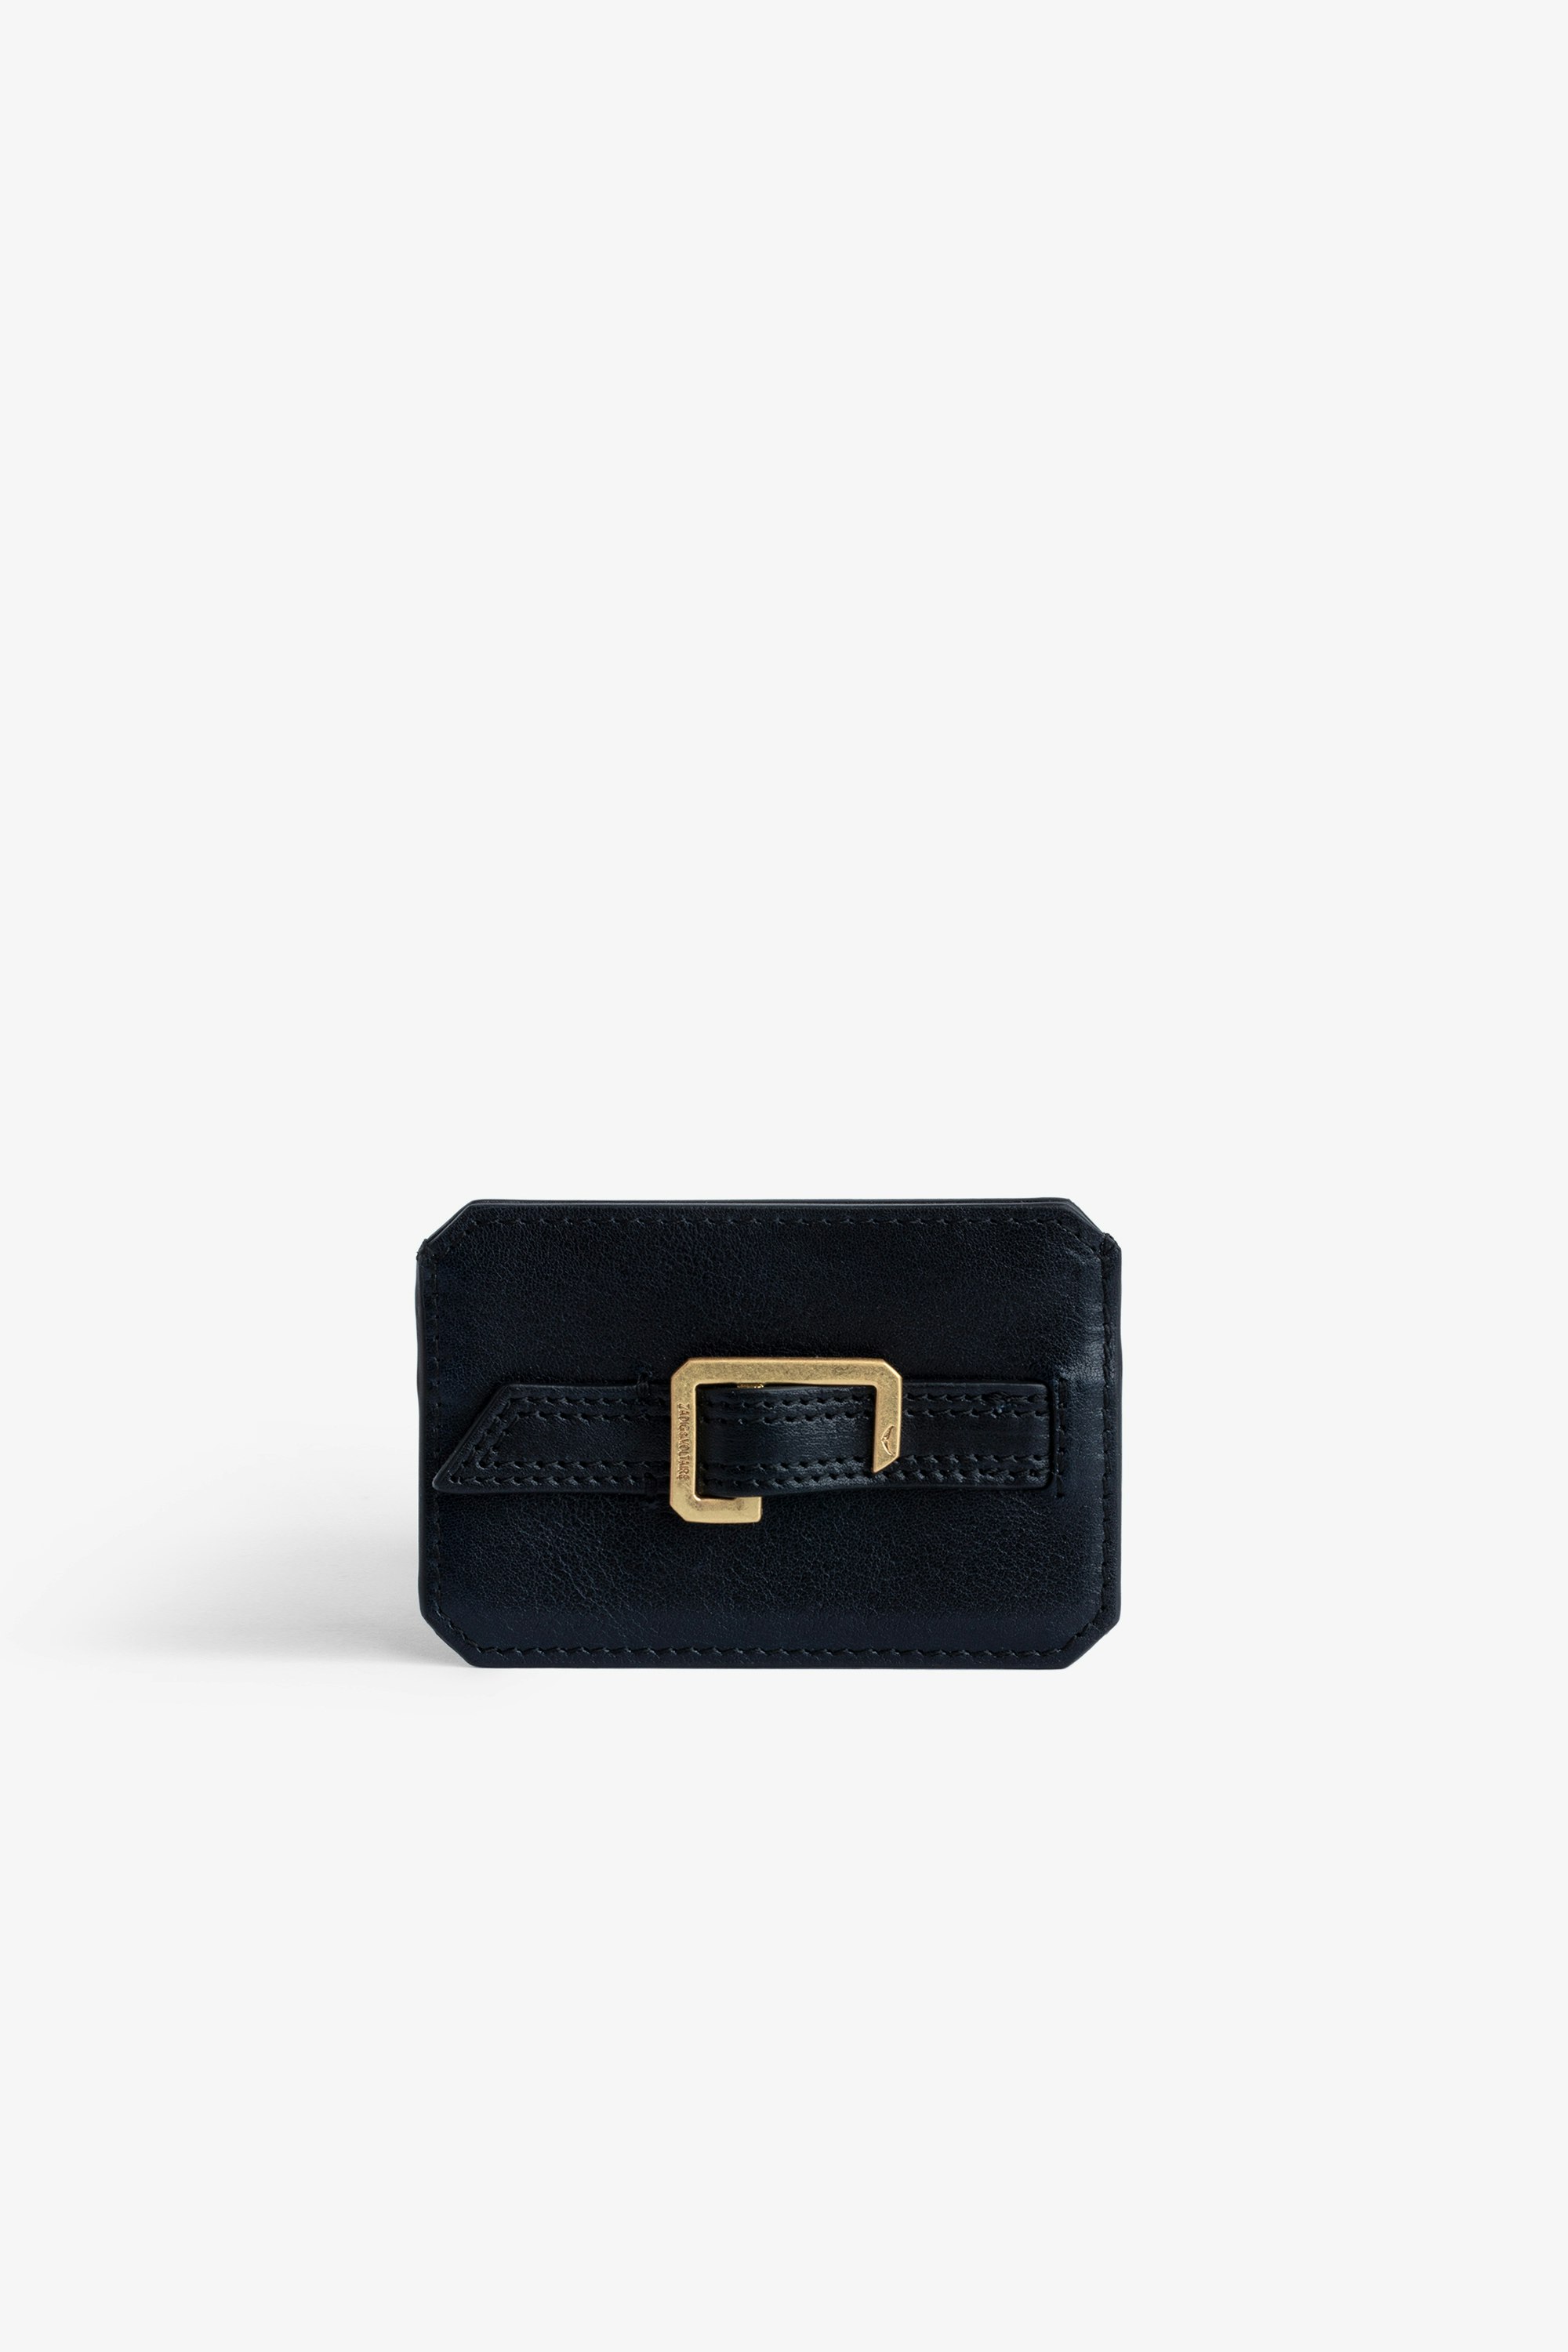 Le Cecilia Pass 財布 Women’s navy blue leather card holder 